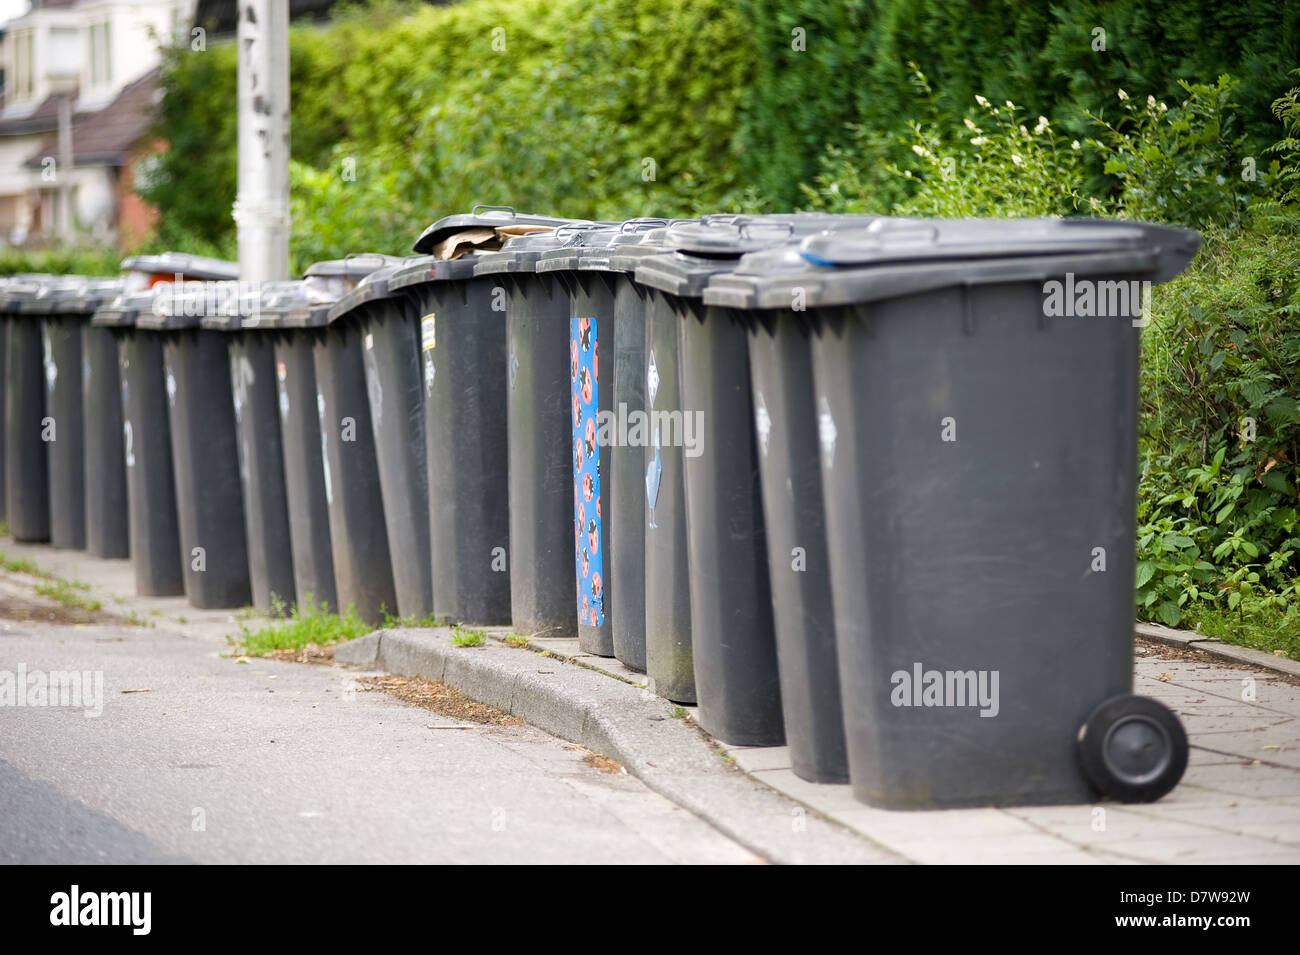 A row of grey wheelie bins full of carbage Stock Photo